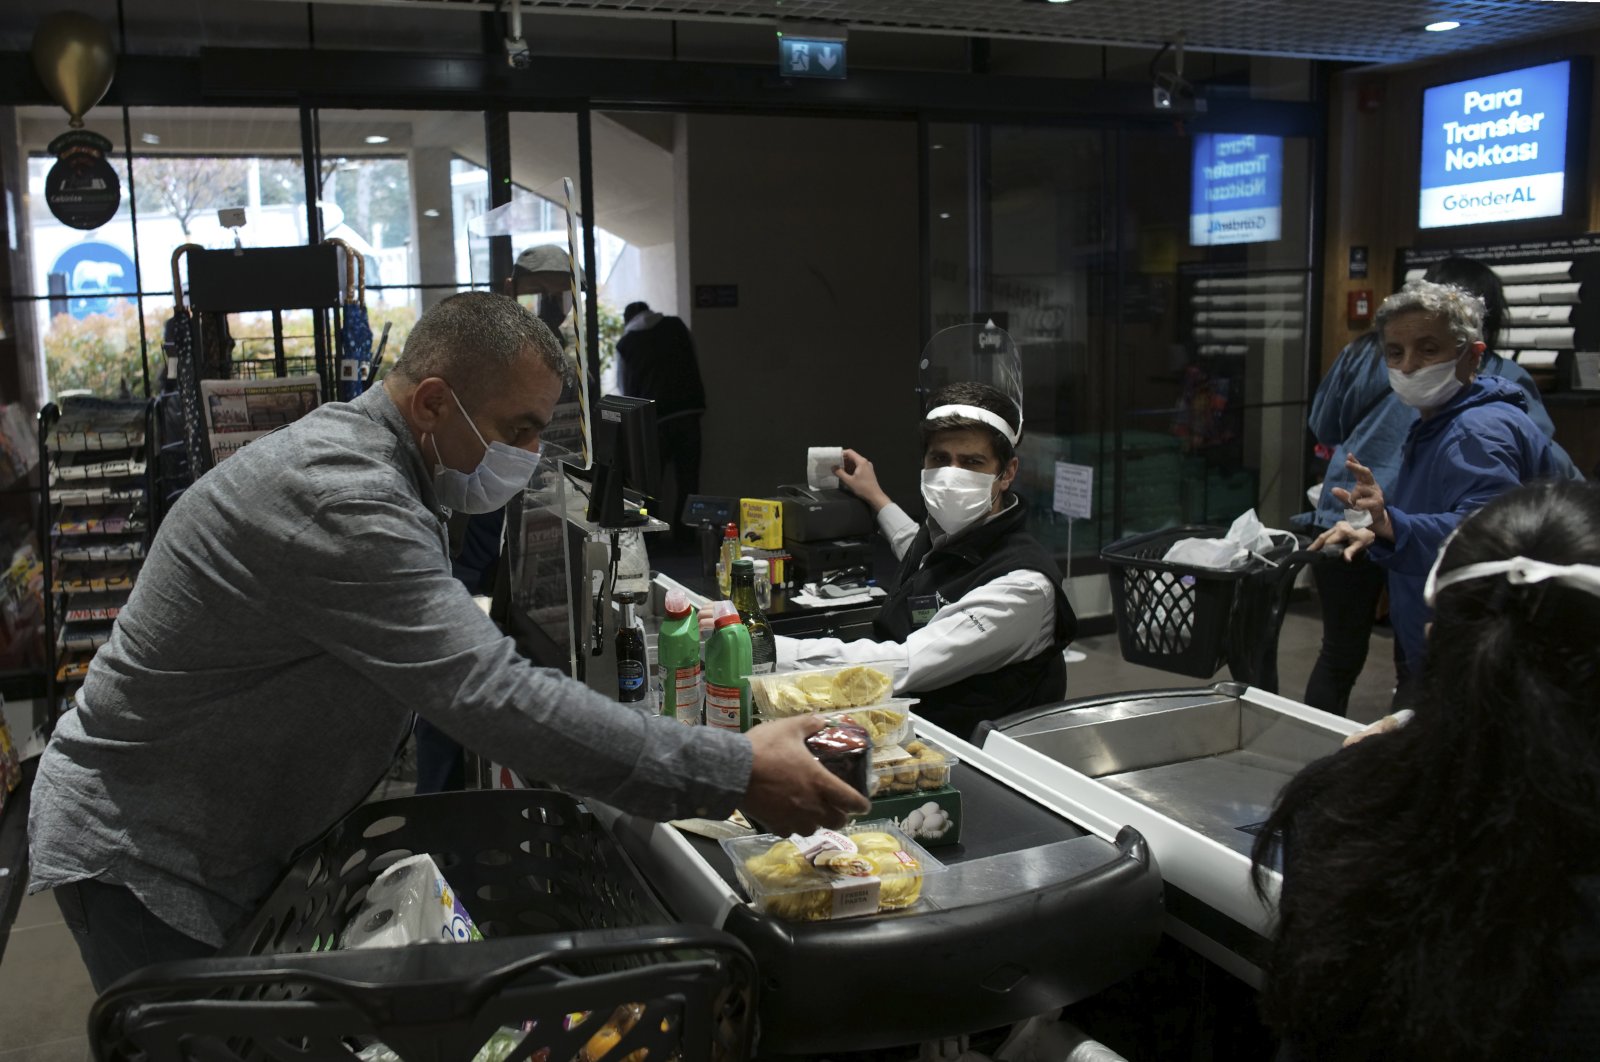 People wearing face masks shop for food at a market, in Ankara Turkey, Tuesday, April 21, 2020, two days before the start of a four-day curfew declared by the government in an attempt to control the spread of coronavirus. (AP Photo)